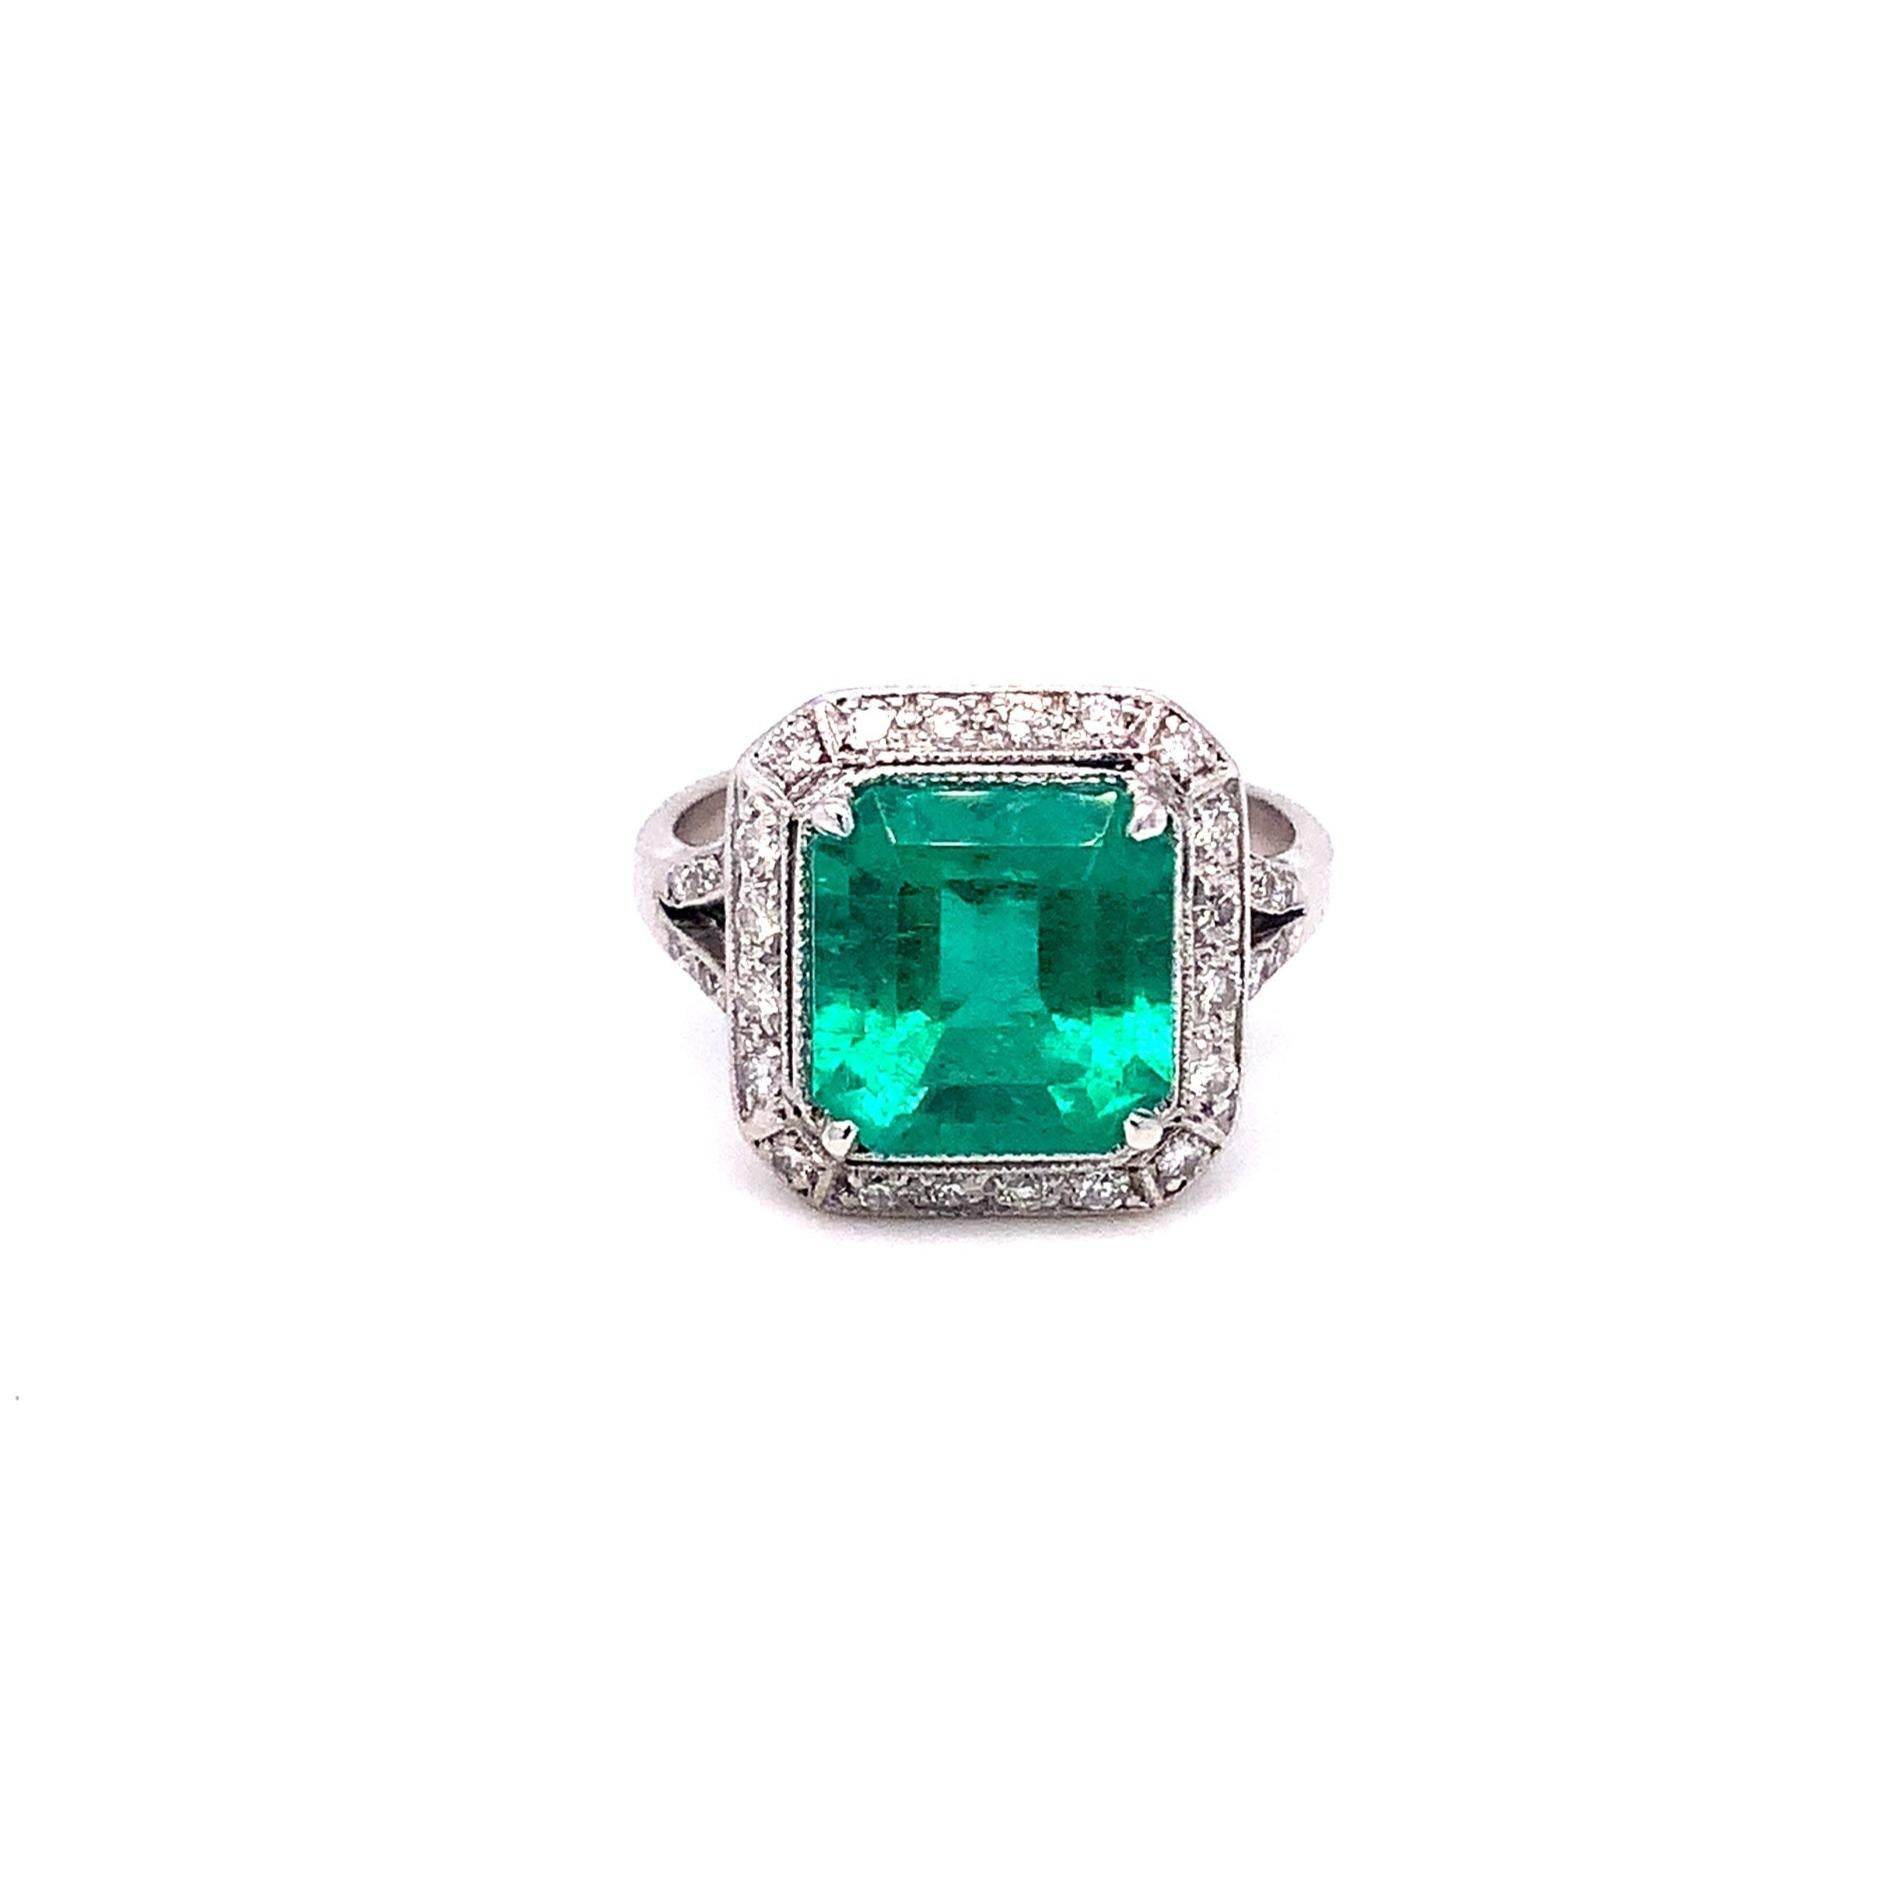 This eye-catching 3.19 ct Vintage Emerald and 0.40 cts t.w. The ring is set in 18 kt White Gold and makes a statement with its stunning combination of green and white. The bold emerald is beautifully framed by the diamond accents, making this piece